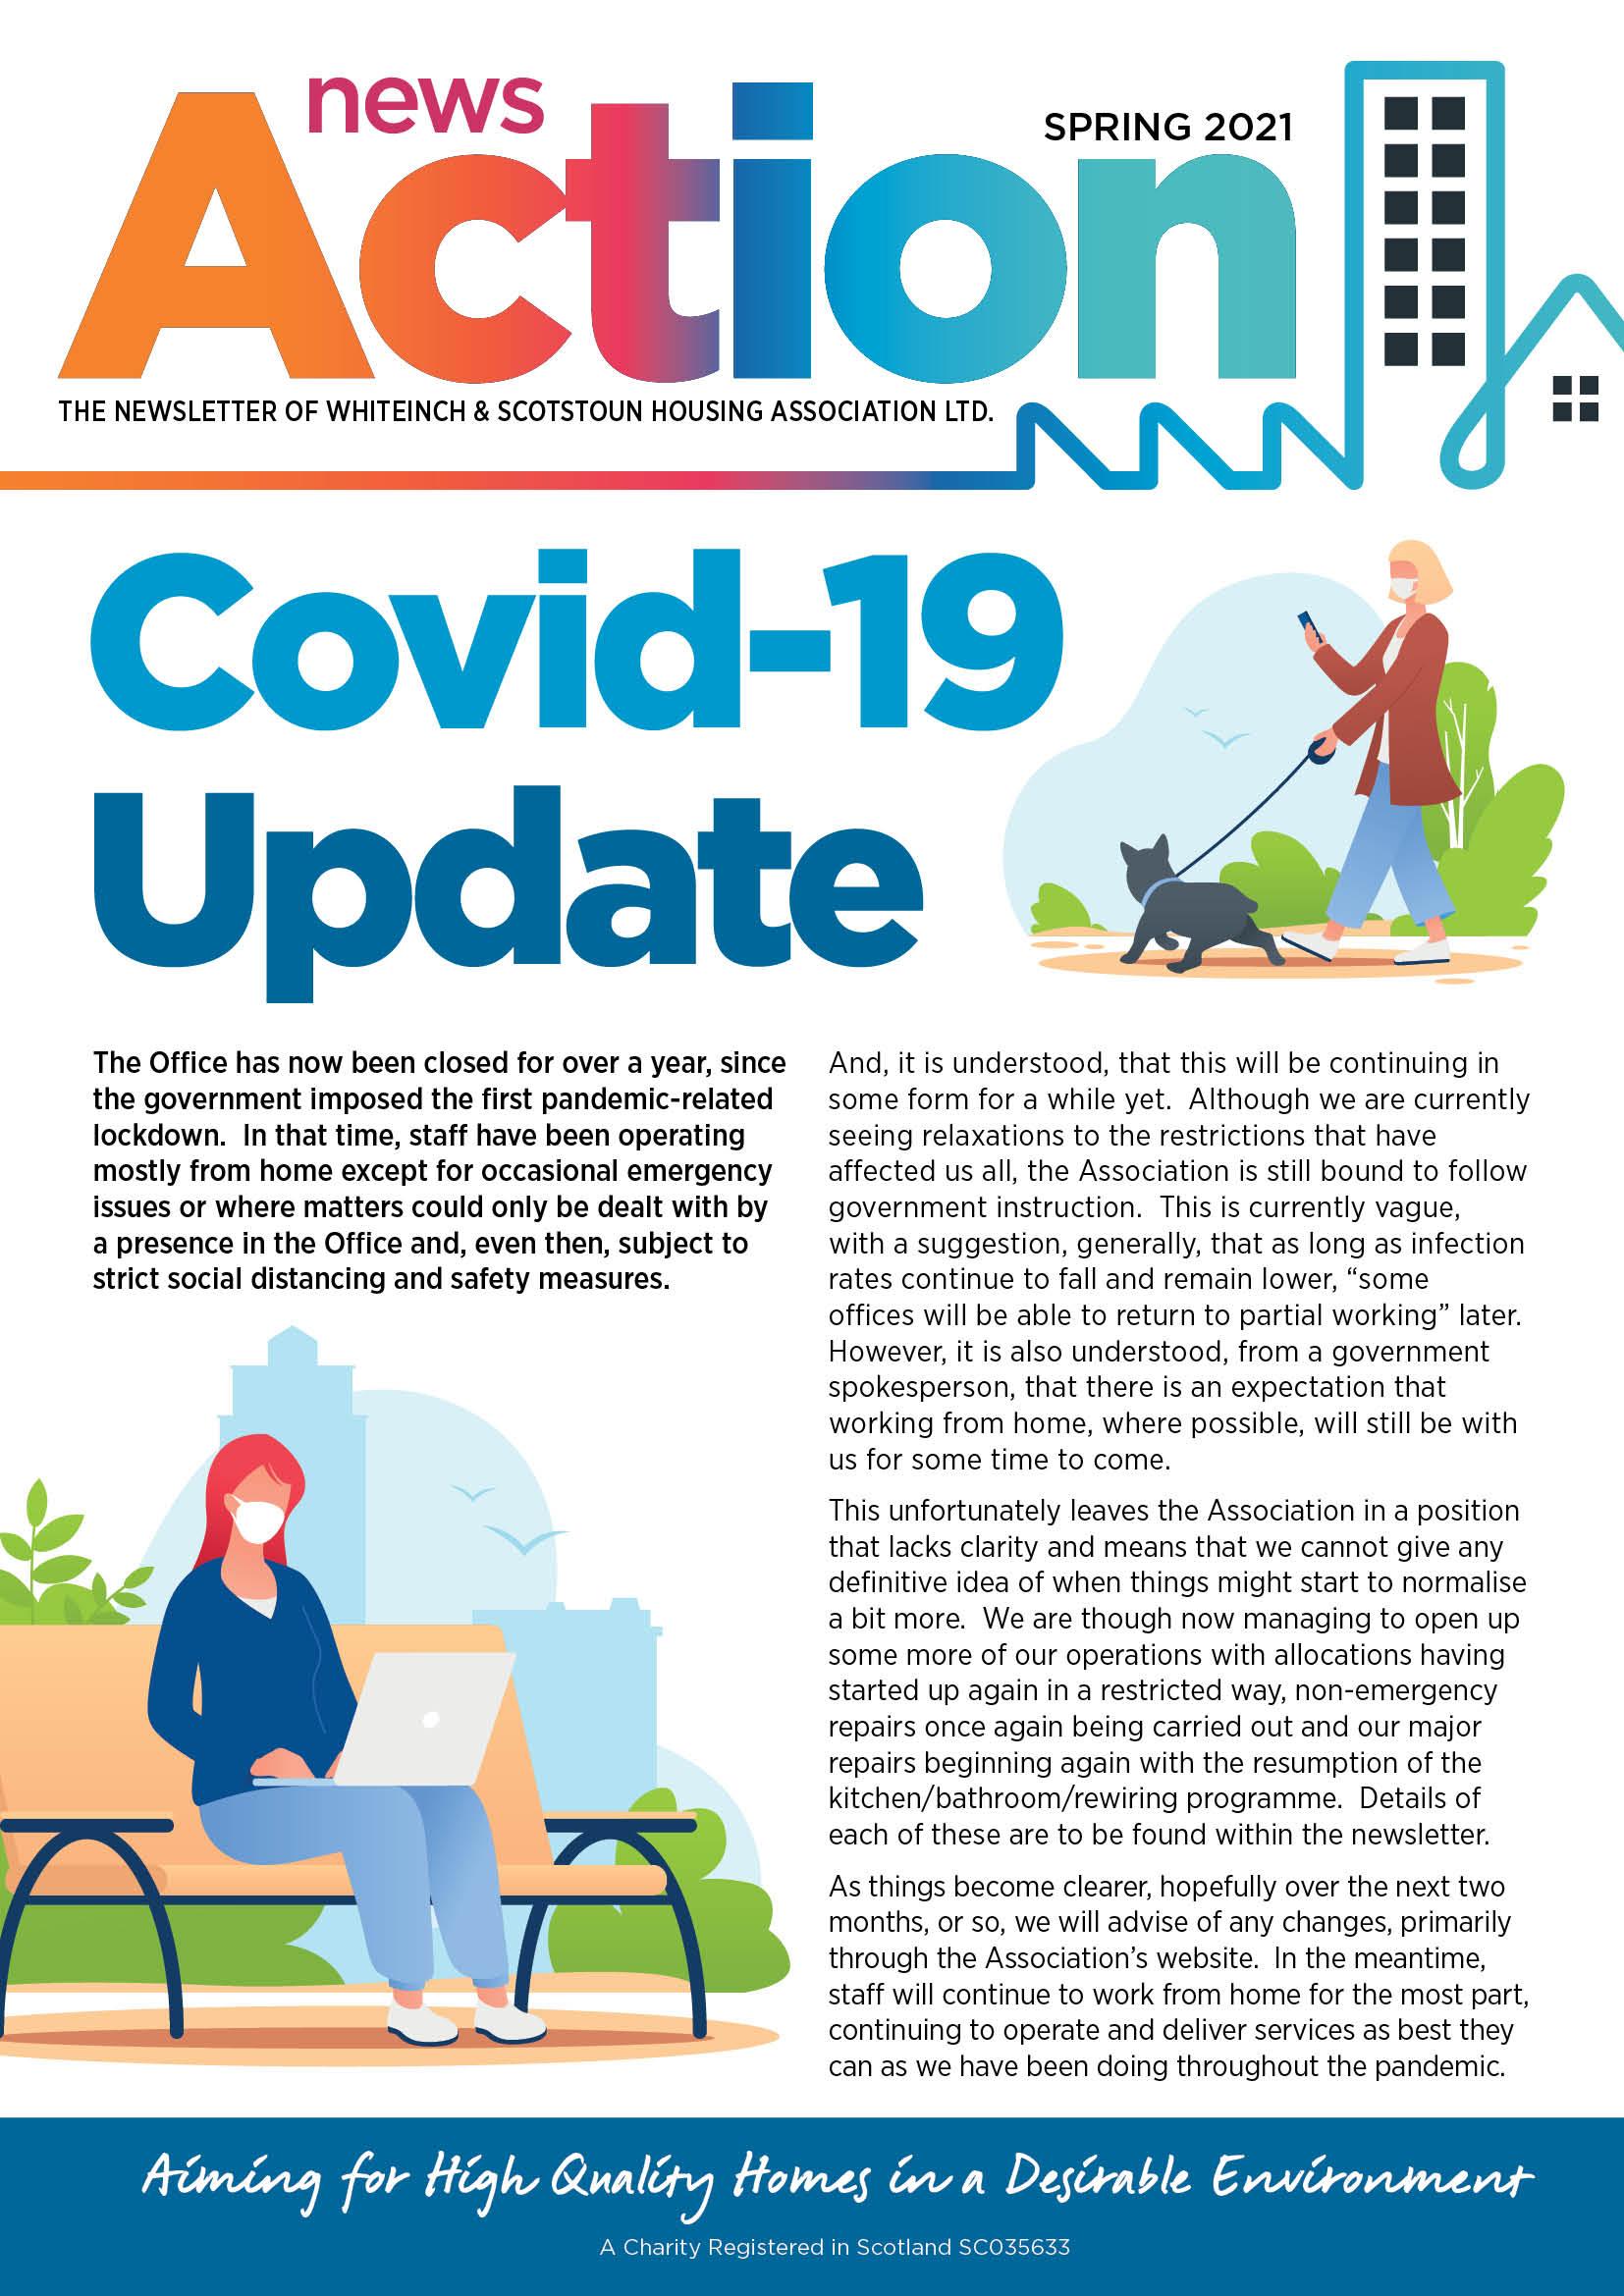 Spring 2021 Newsletter Front Page